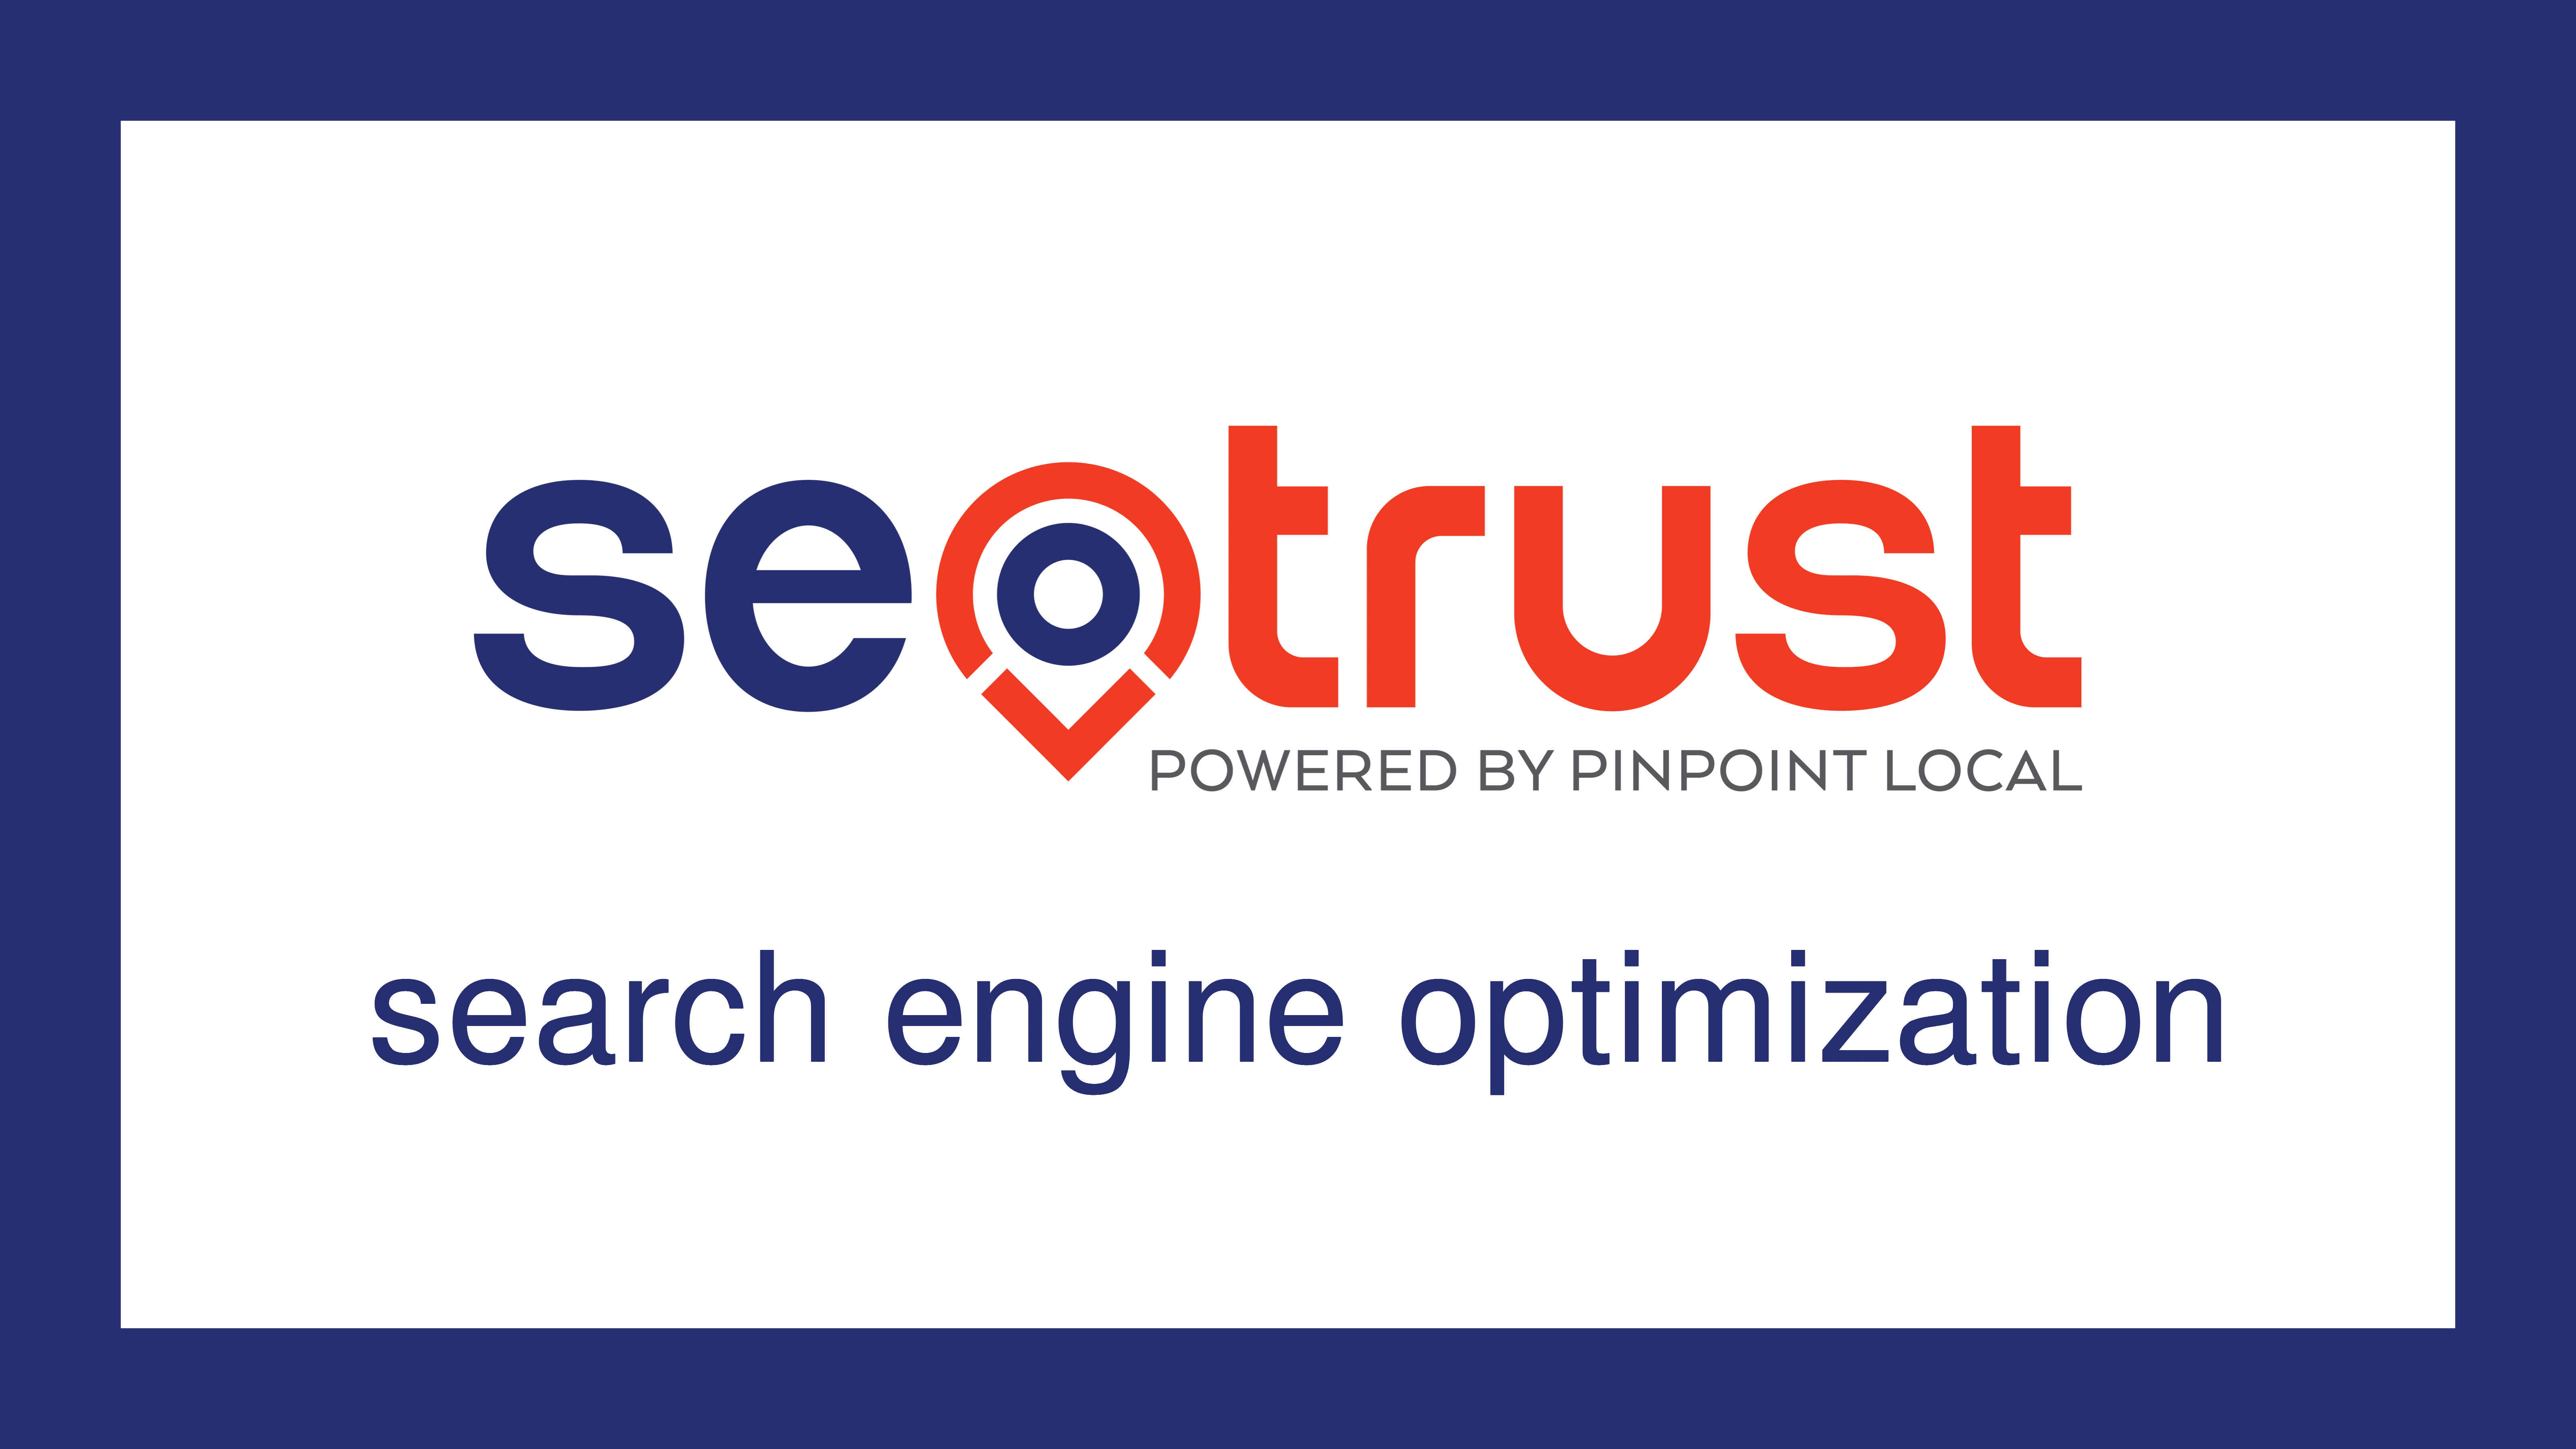 Are you in need of the best SEO company? Look no further! Our search engine optimization services provide top-notch results. With years of experience, our team of experts offers superior SEO services that